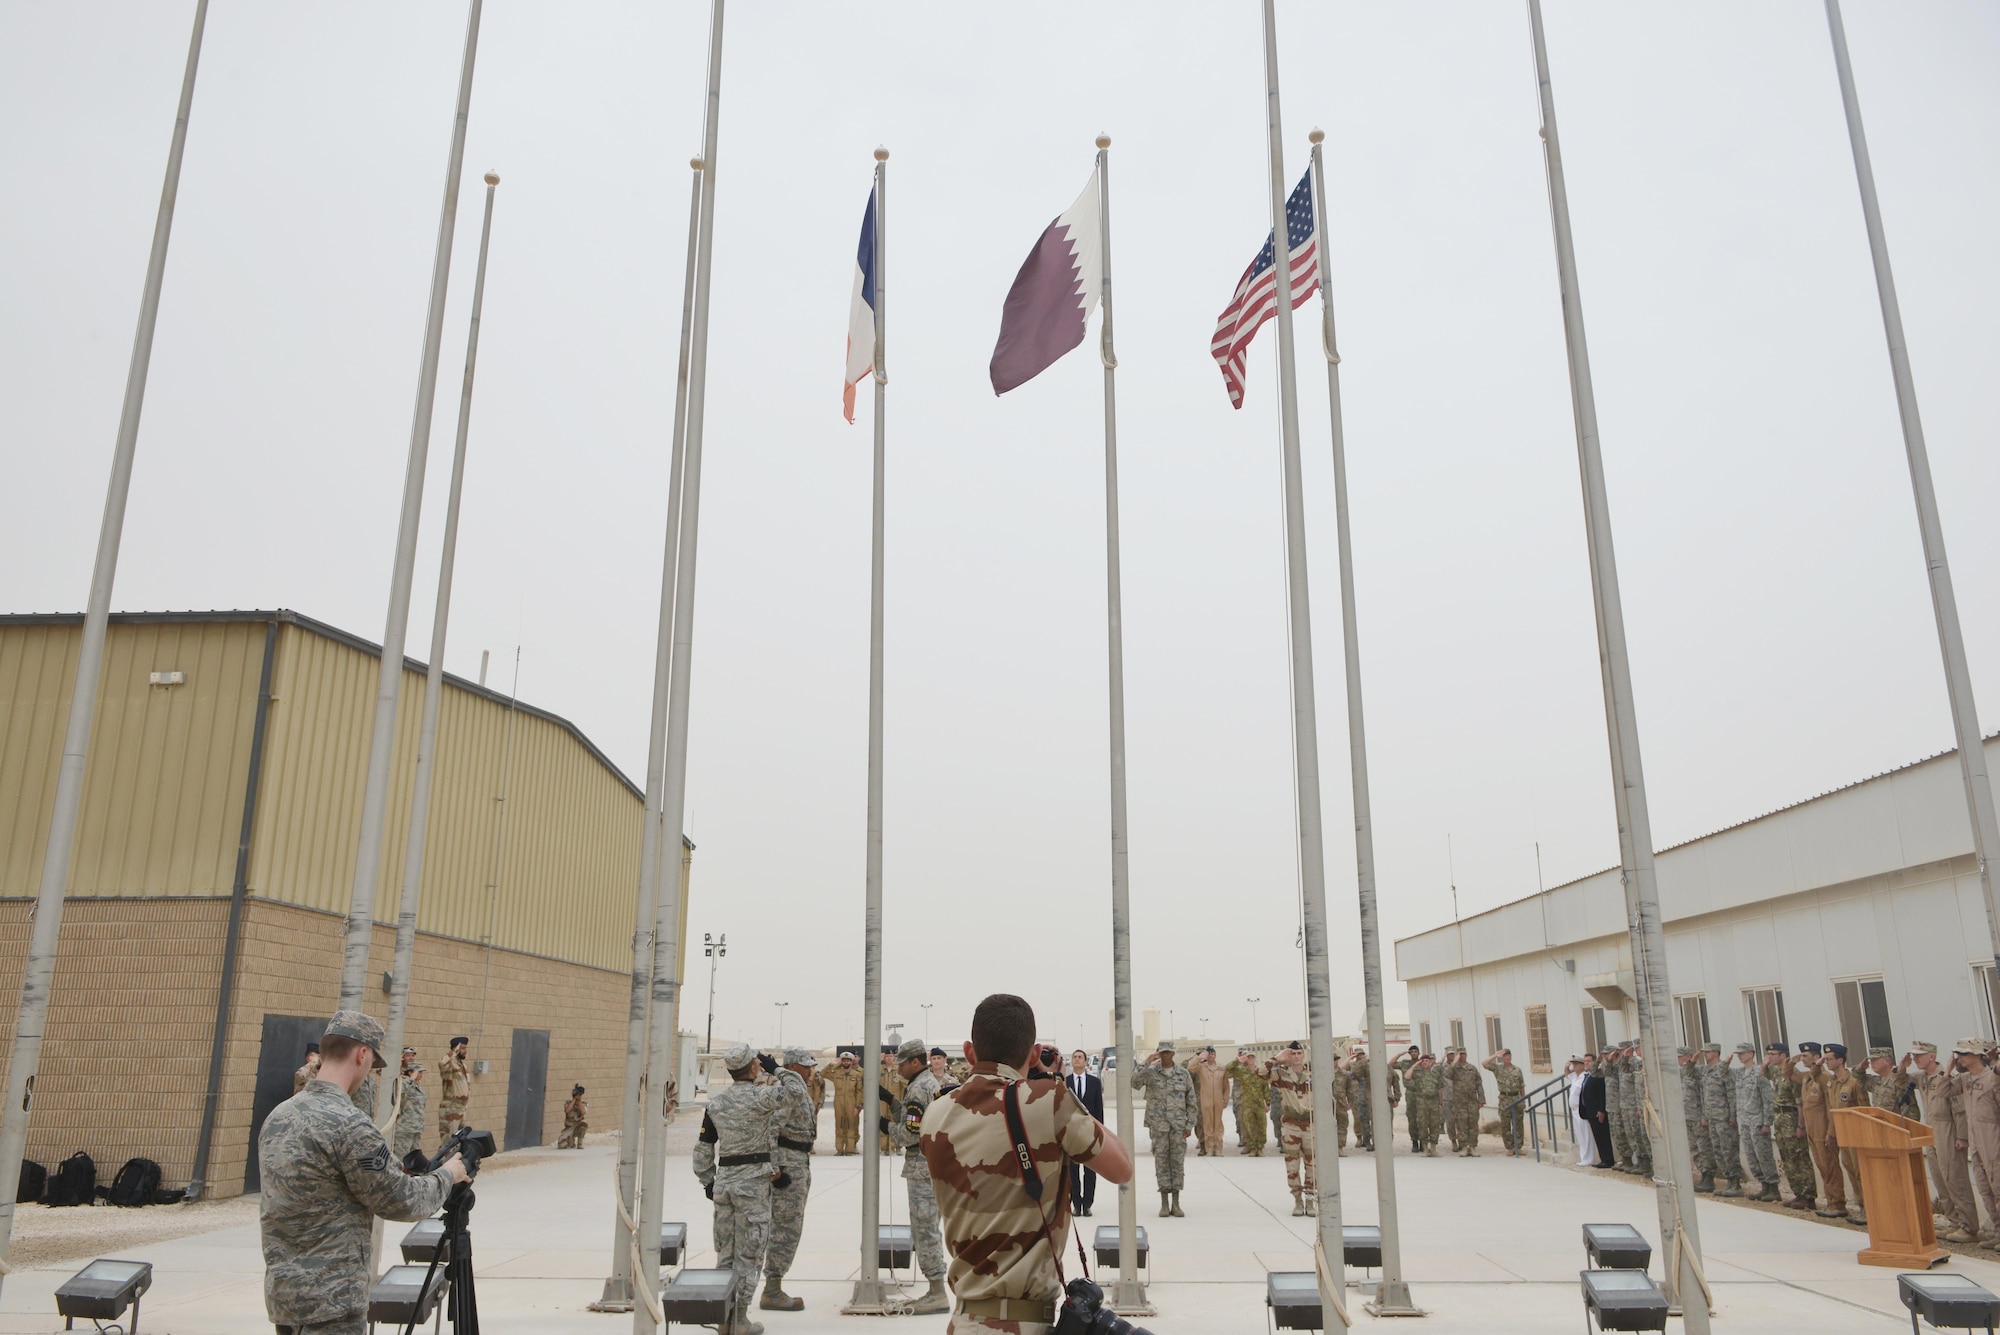 Broadcasters and Photojournalists from the 379th Air Expeditionary Wing and French Combined Air Operations Center document the beginning of the Bastille Day ceremony July 14, 2015 at Al Udeid Air Base, Qatar. The French celebrate July 14th as Bastille Day to commemorate the storming of Bastille at the beginning of the French revolution in 1789. (U.S. Air Force photo/Staff Sgt. Alexandre Montes)